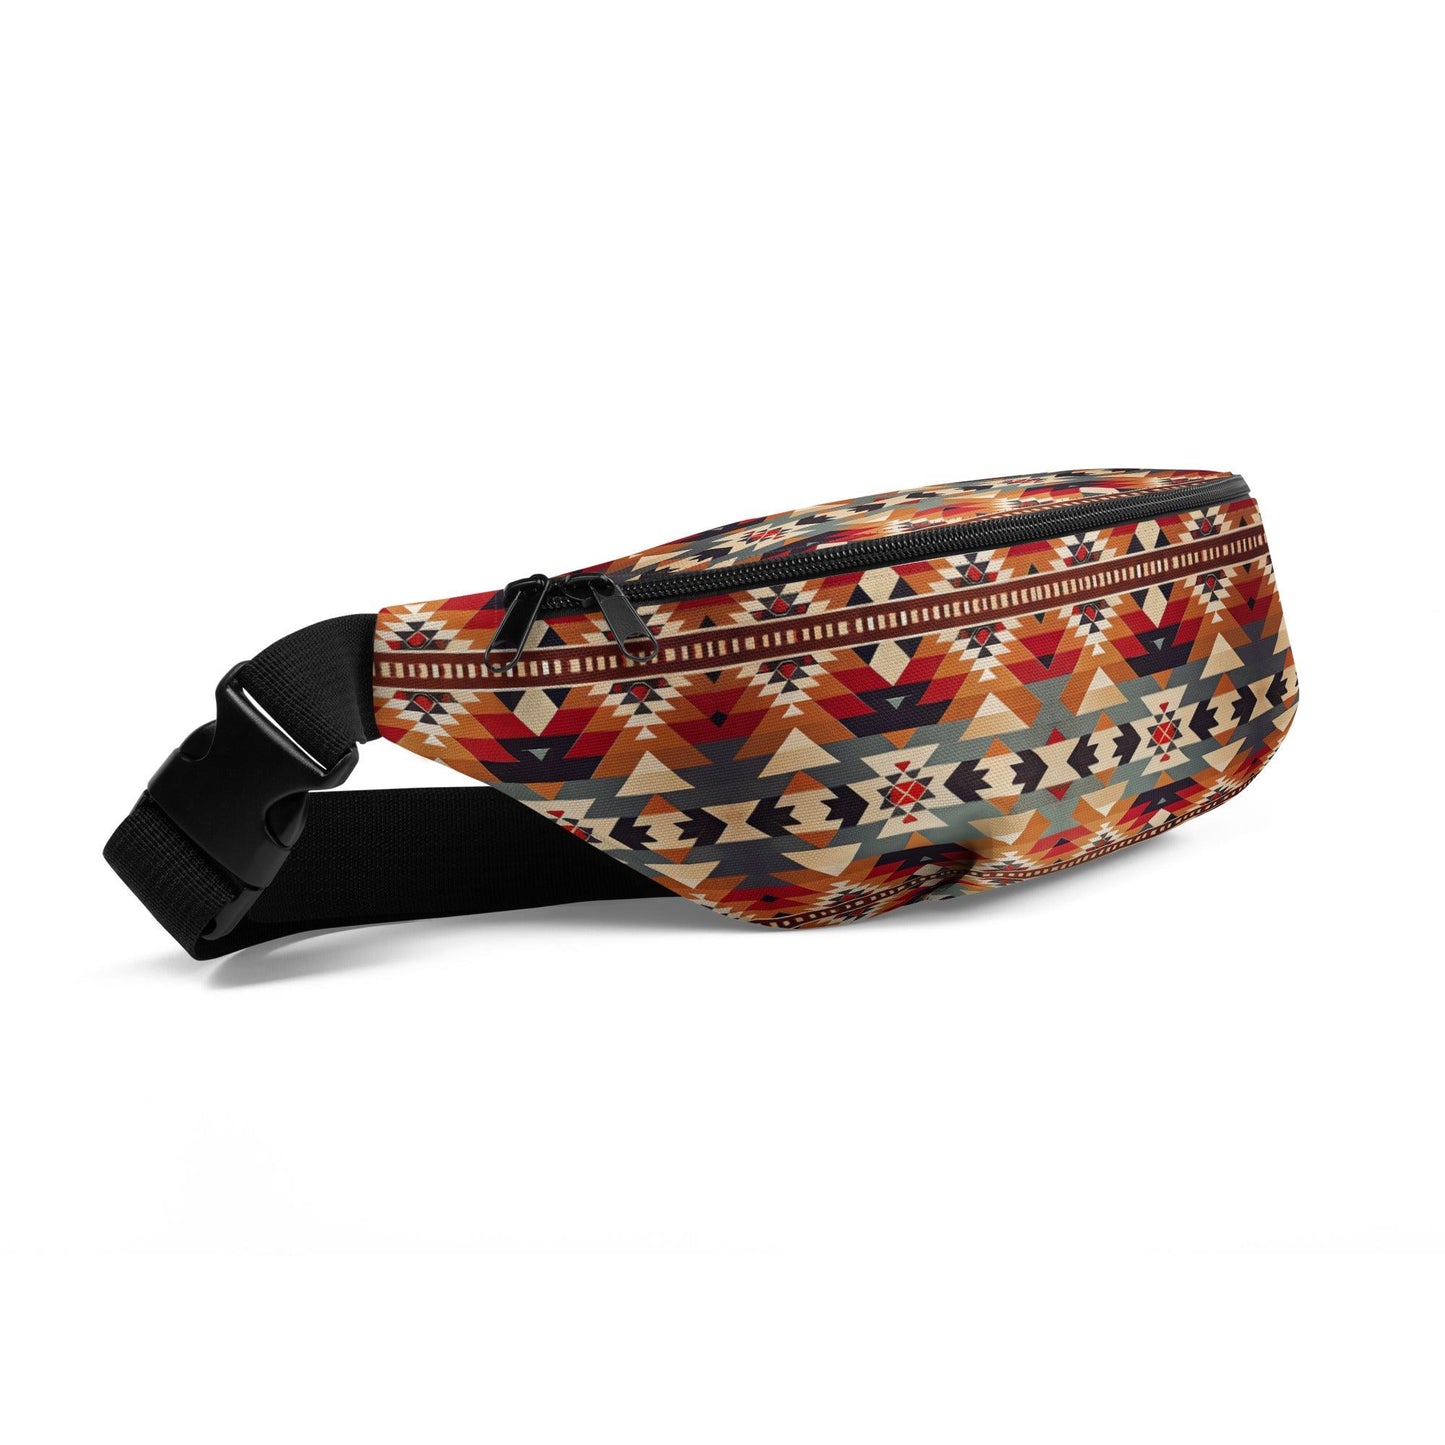 Native American Sunset Fanny Pack - The Global Wanderer